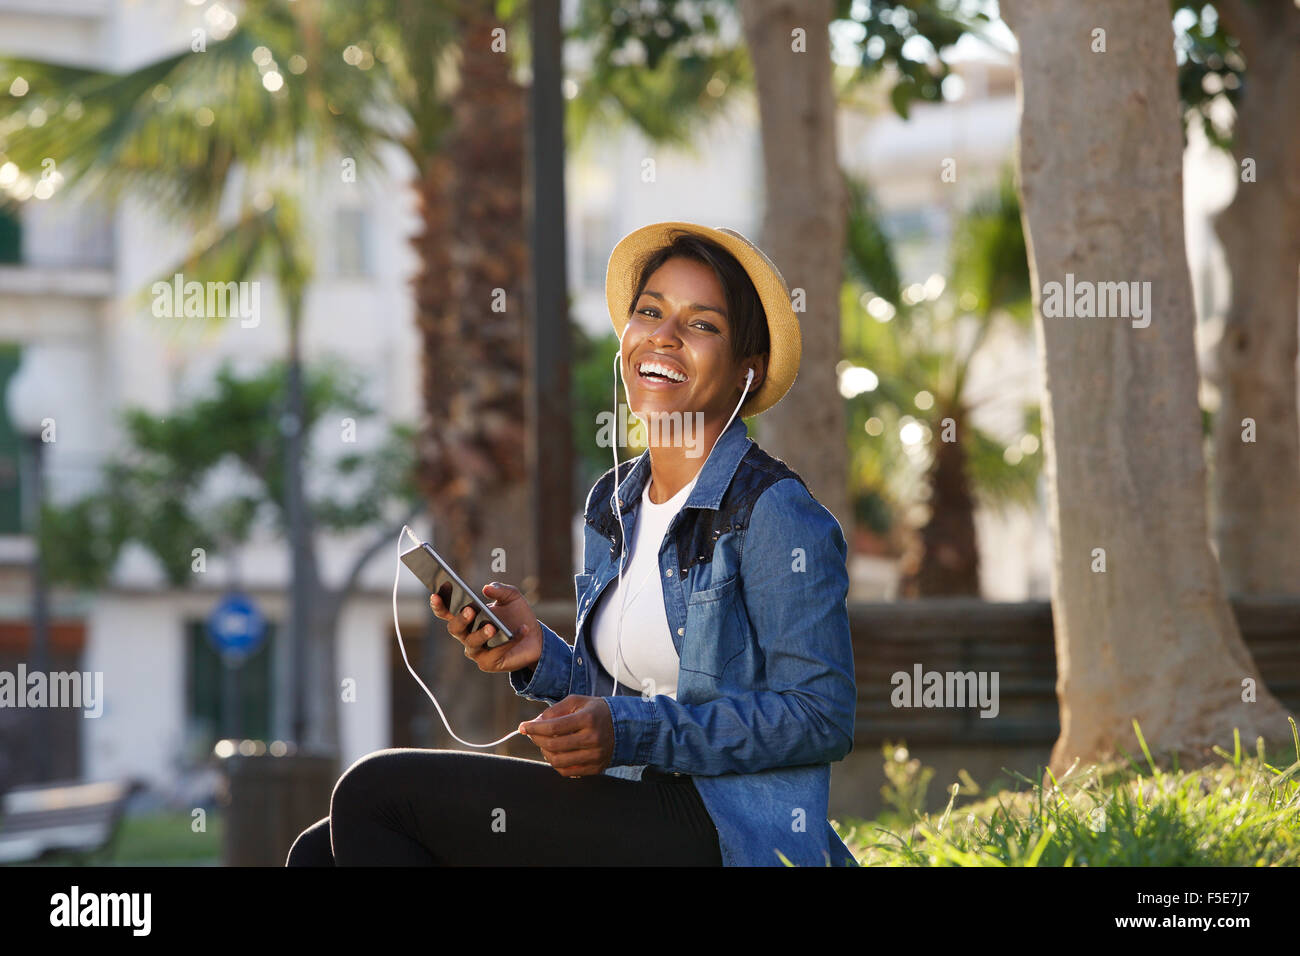 Portrait of a young black woman laughing with mobile phone Stock Photo